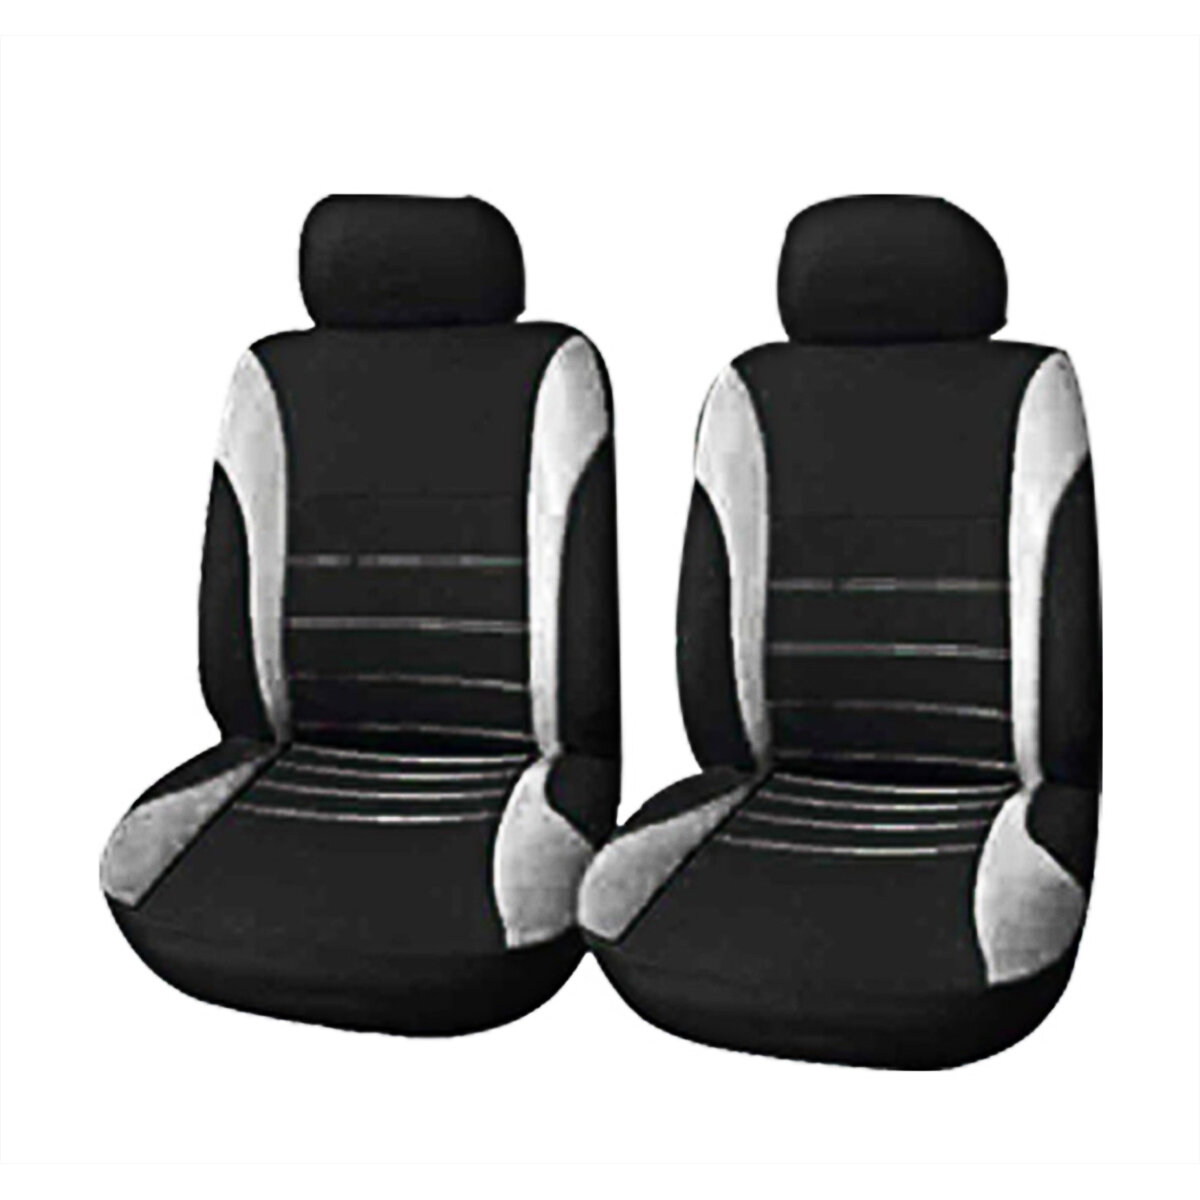 4 pack universal car seat cover set front rear head rests full set auto cover